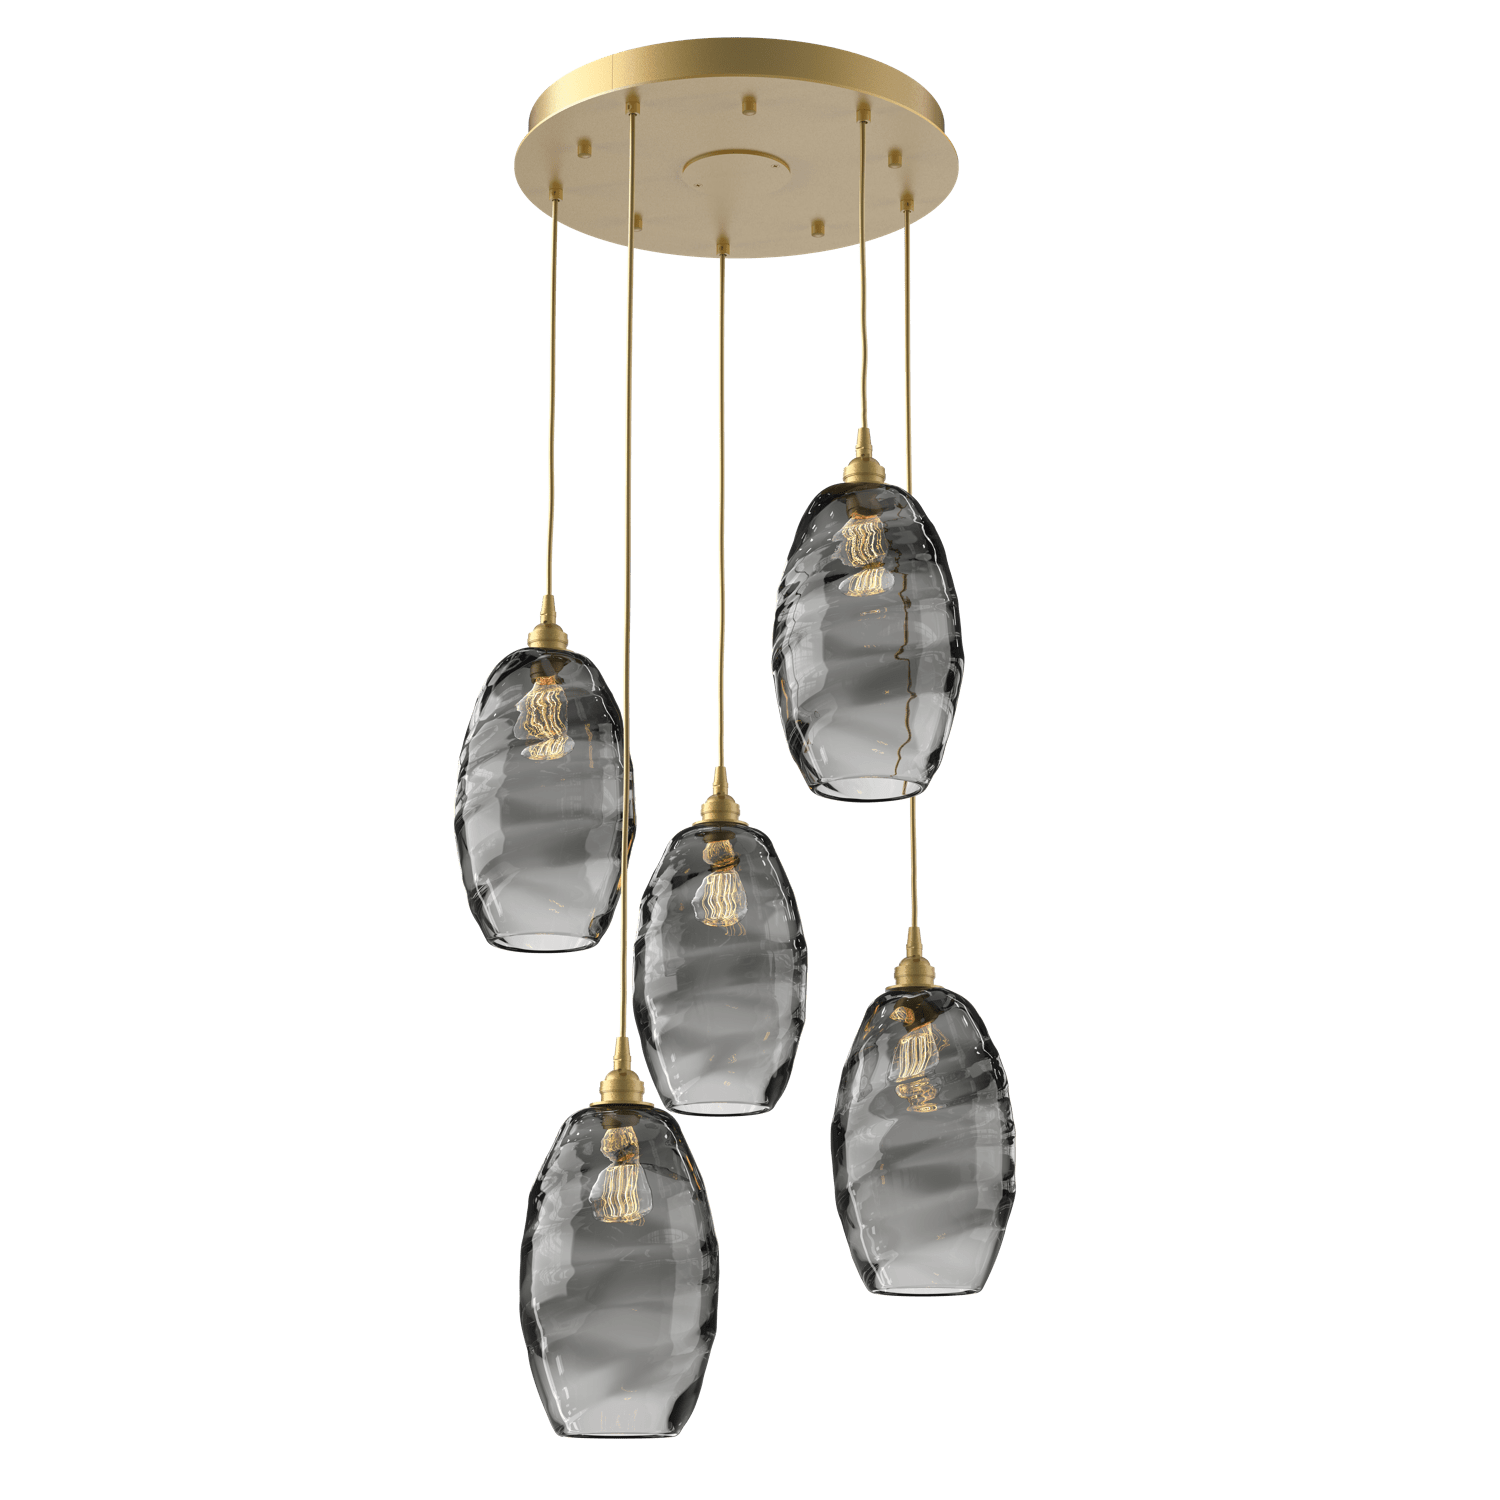 CHB0035-05-GB-OS-Hammerton-Studio-Optic-Blown-Glass-Elisse-5-light-round-pendant-chandelier-with-gilded-brass-finish-and-optic-smoke-blown-glass-shades-and-incandescent-lamping